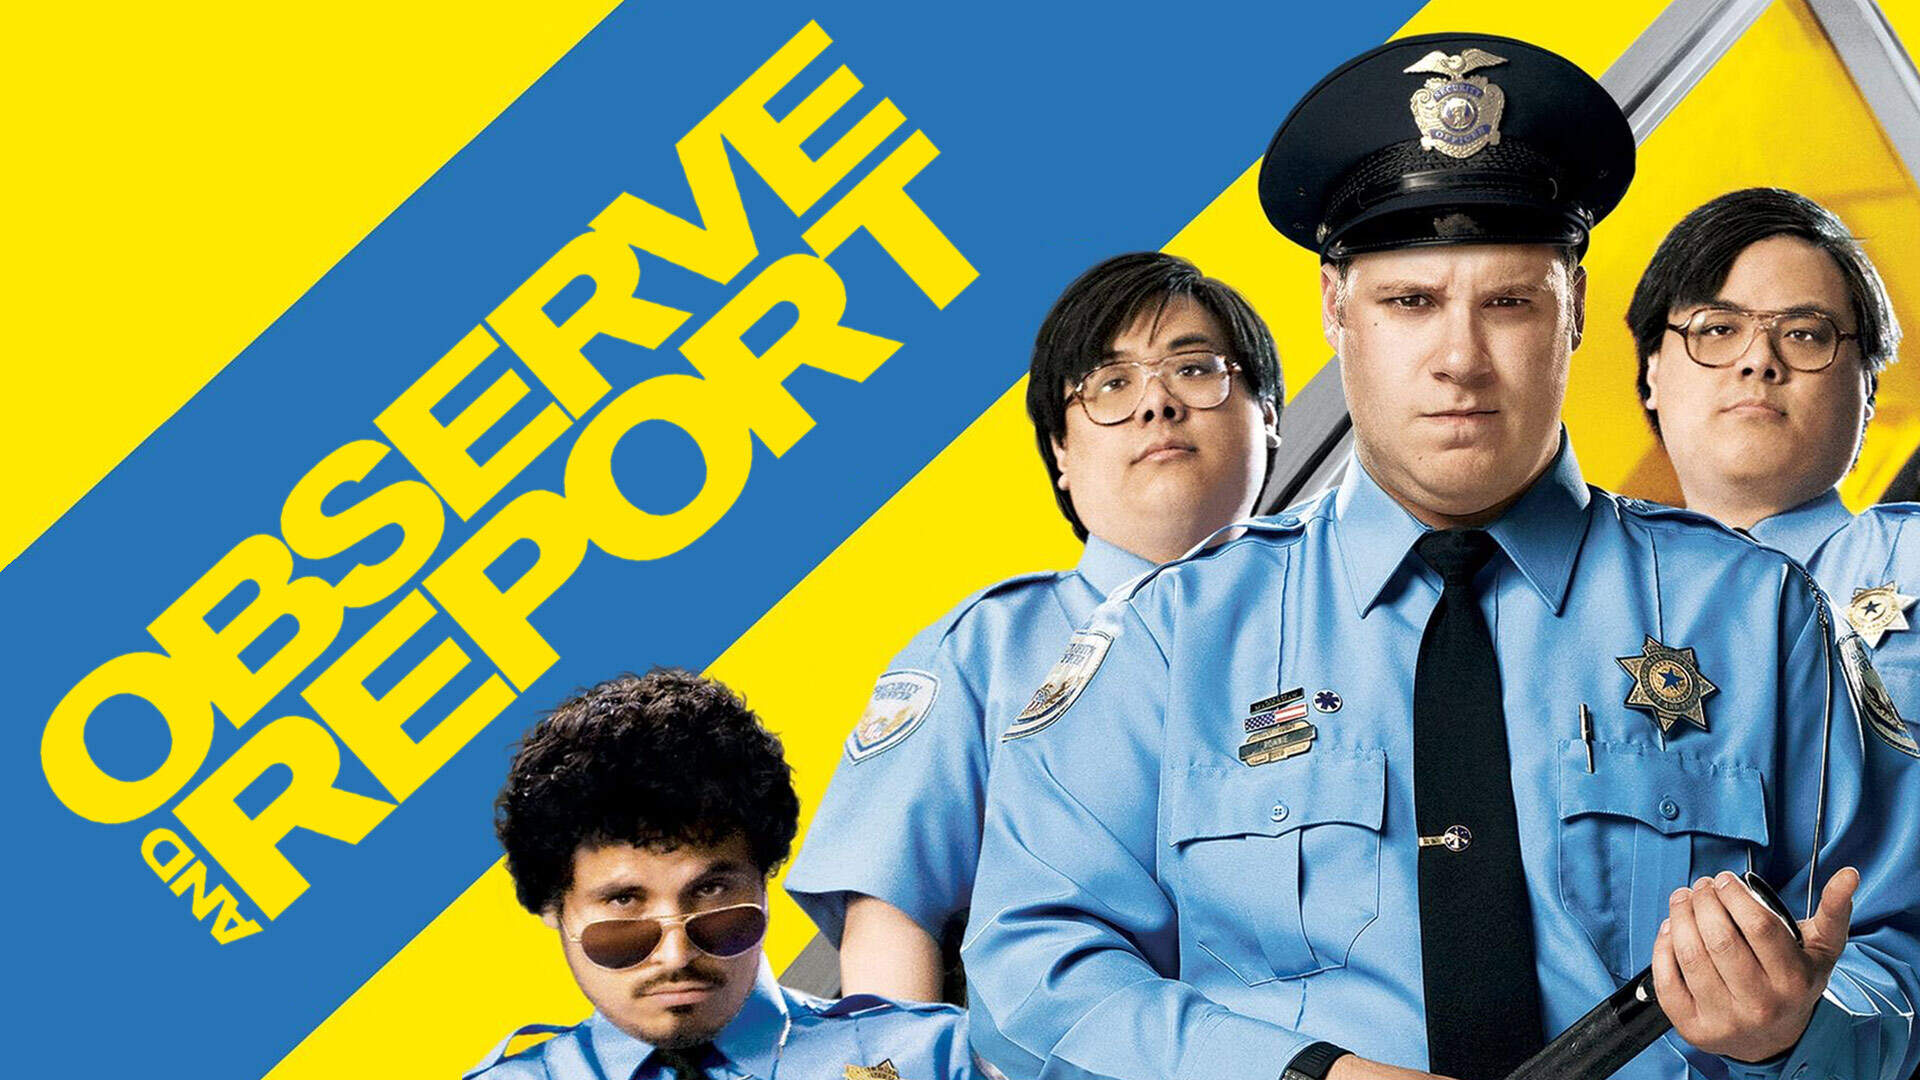 42-facts-about-the-movie-observe-and-report